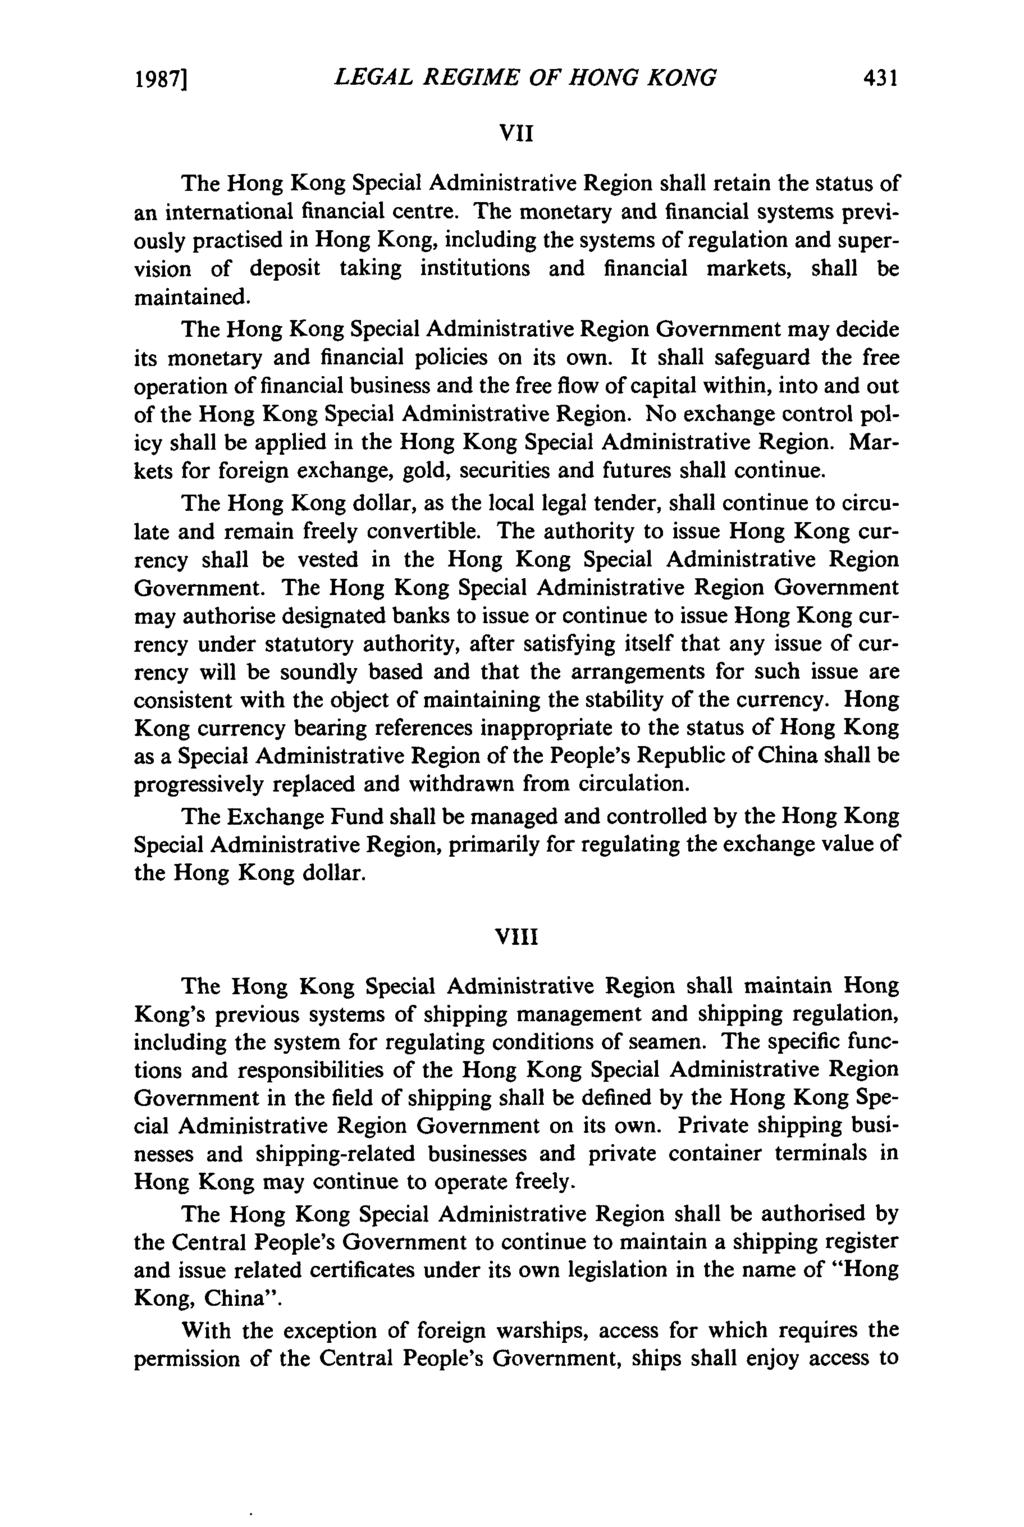 1987] LEGAL REGIME OF HONG KONG VII The Hong Kong Special Administrative Region shall retain the status of an international financial centre.